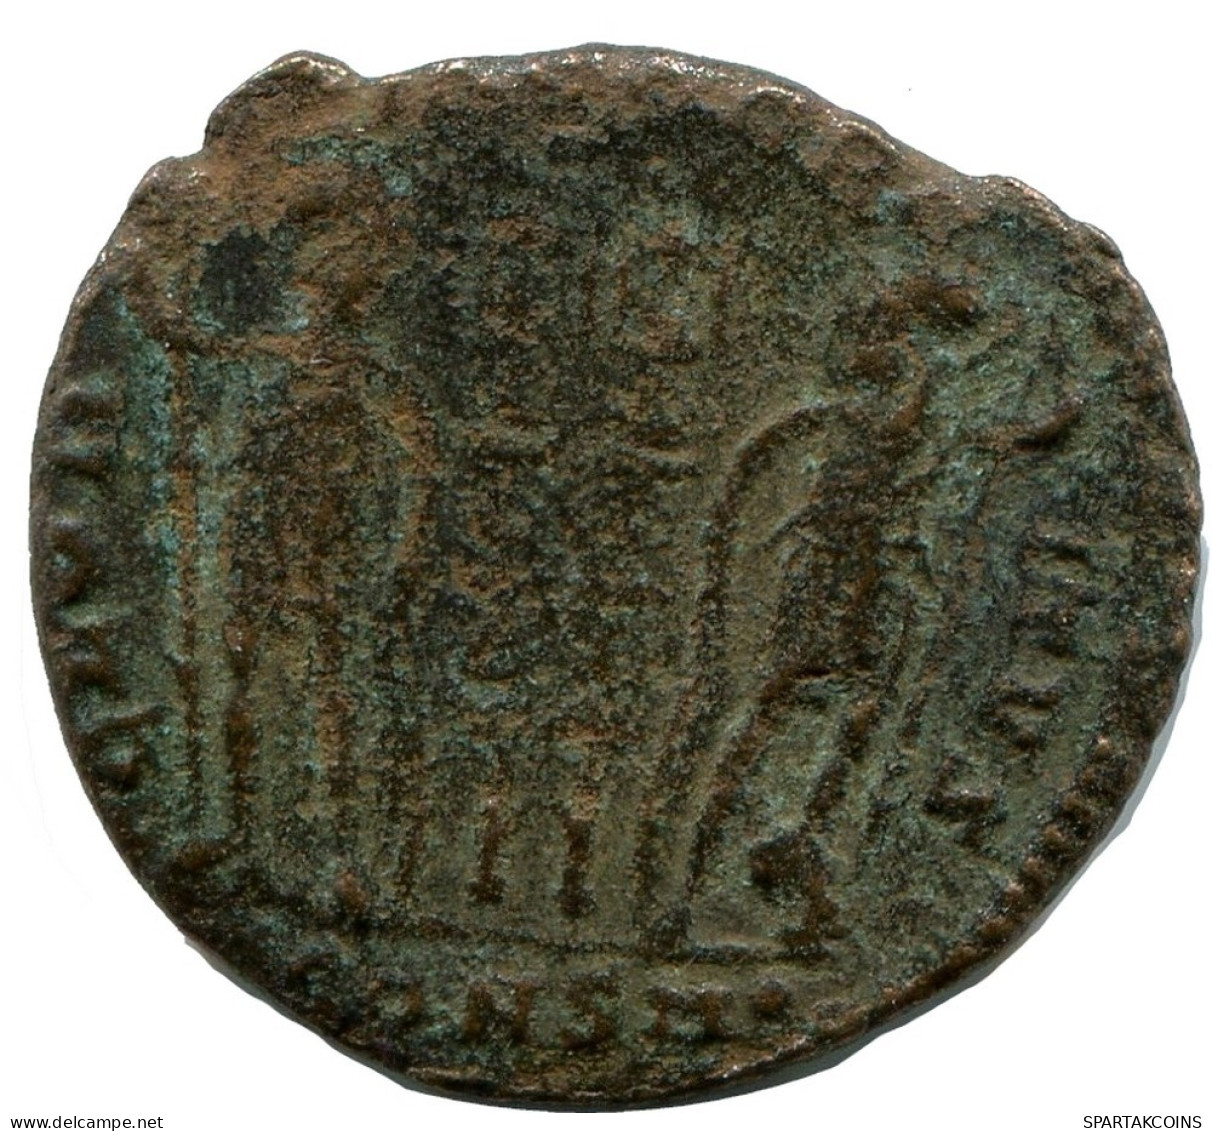 CONSTANTINE I MINTED IN CONSTANTINOPLE FOUND IN IHNASYAH HOARD #ANC10757.14.D.A - The Christian Empire (307 AD To 363 AD)